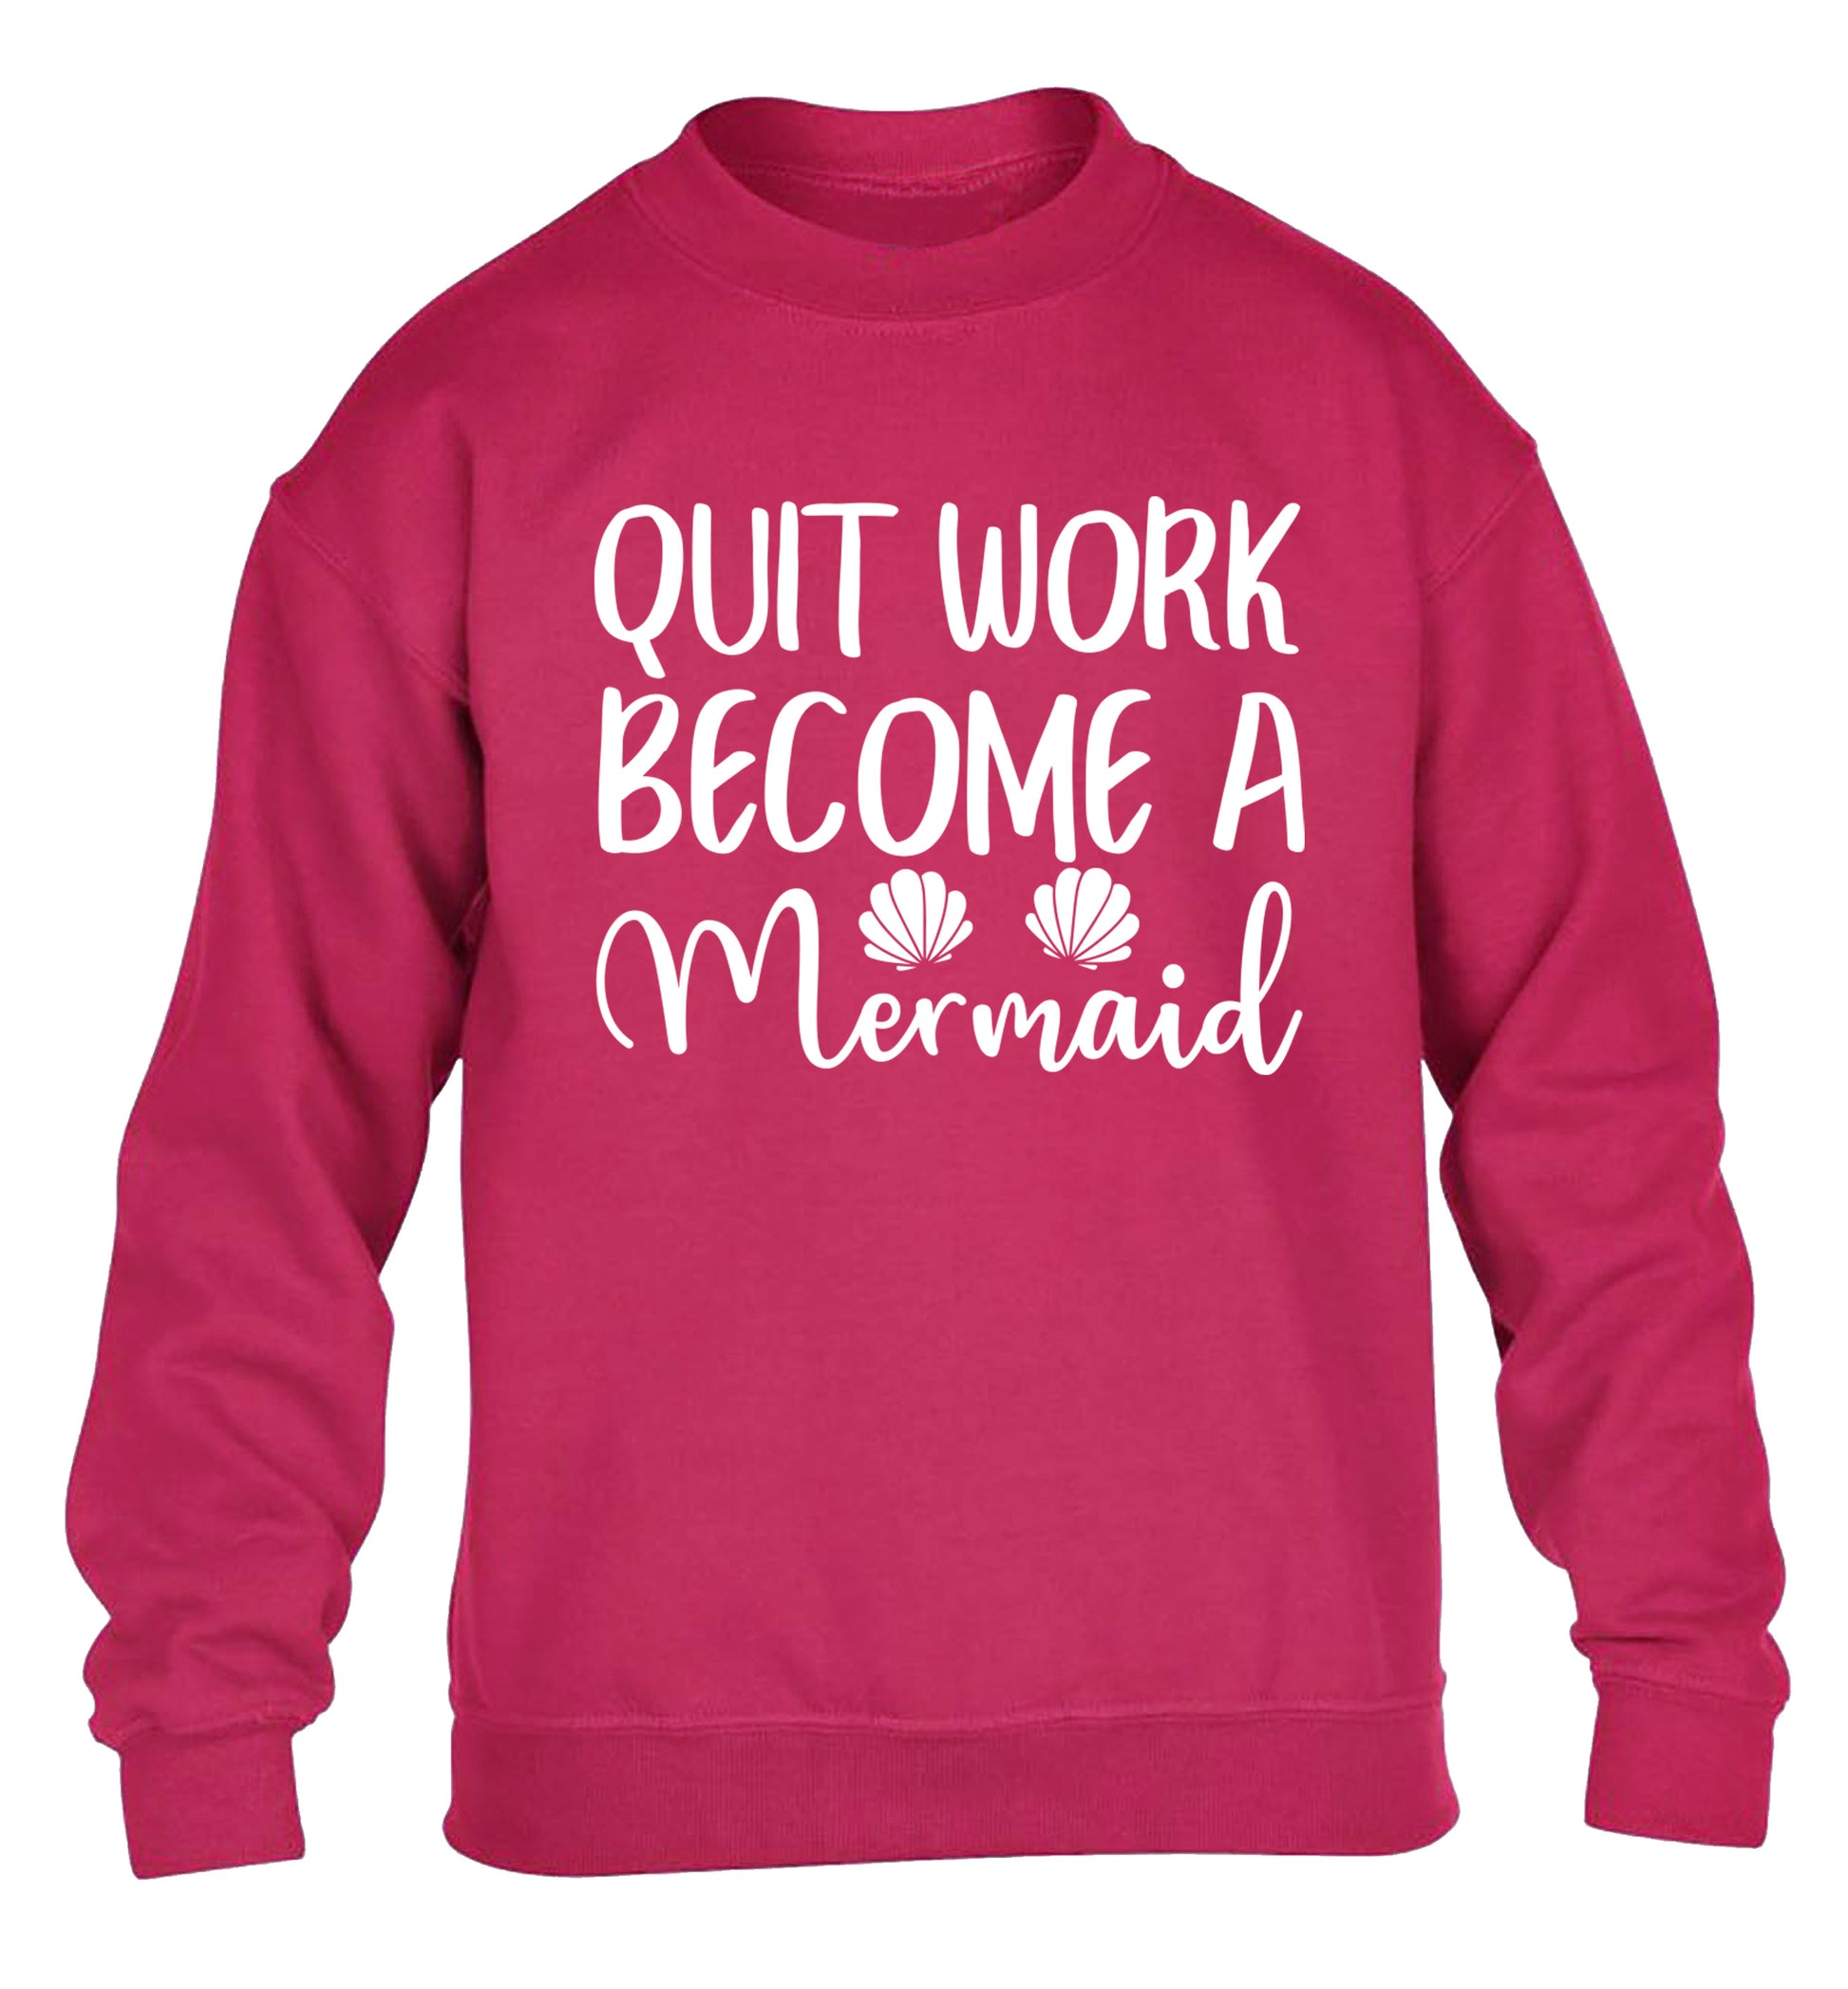 Quit work become a mermaid children's pink sweater 12-13 Years